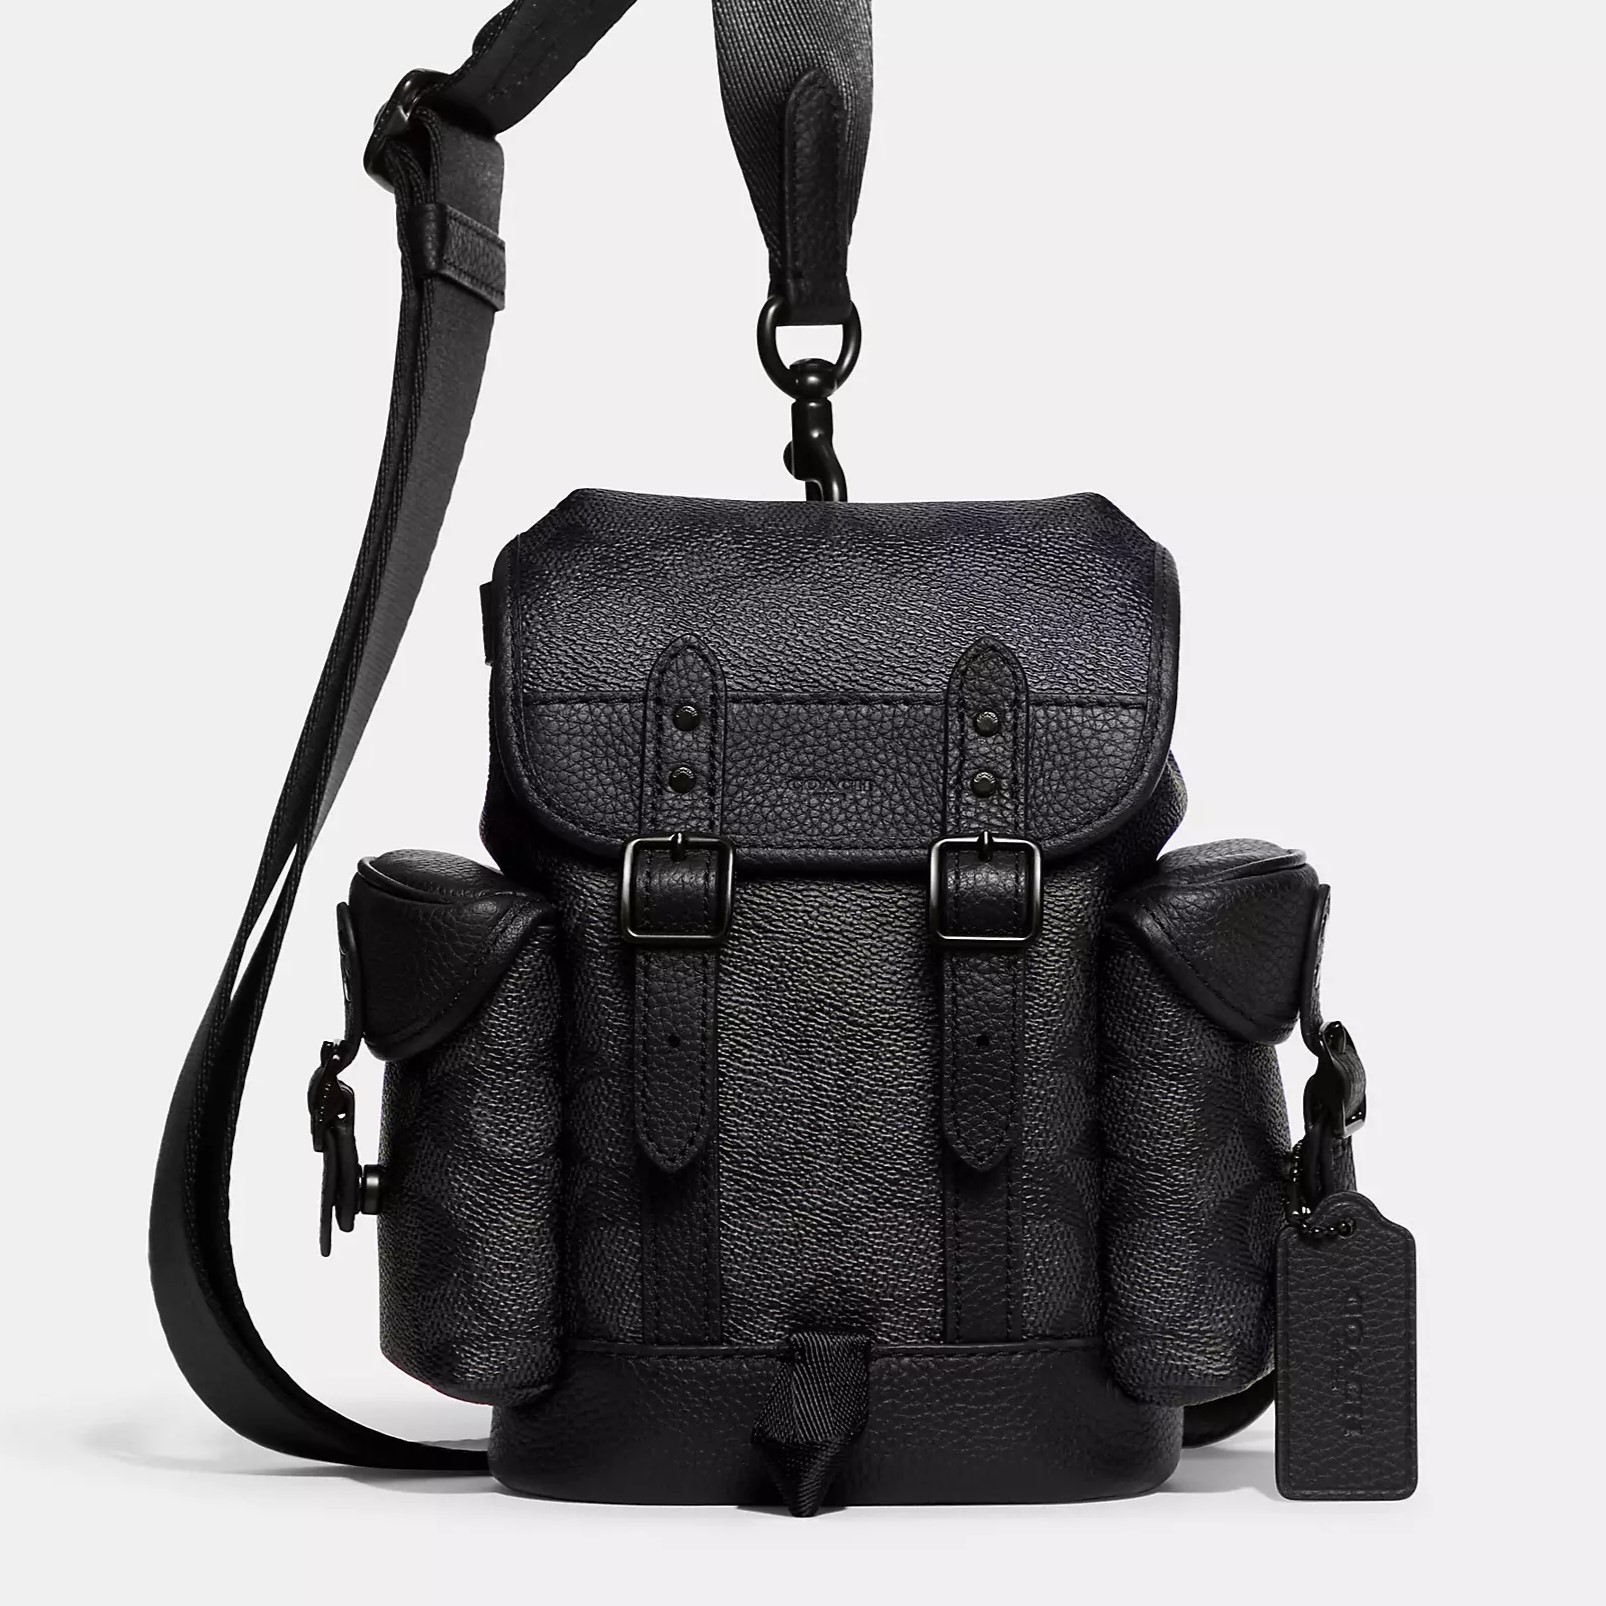 BALO COACH NAM HITCH BACKPACK 13 IN SIGNATURE COATED CANVAS AND SOFT POLISHED PEBBLE LEATHER CE506 2